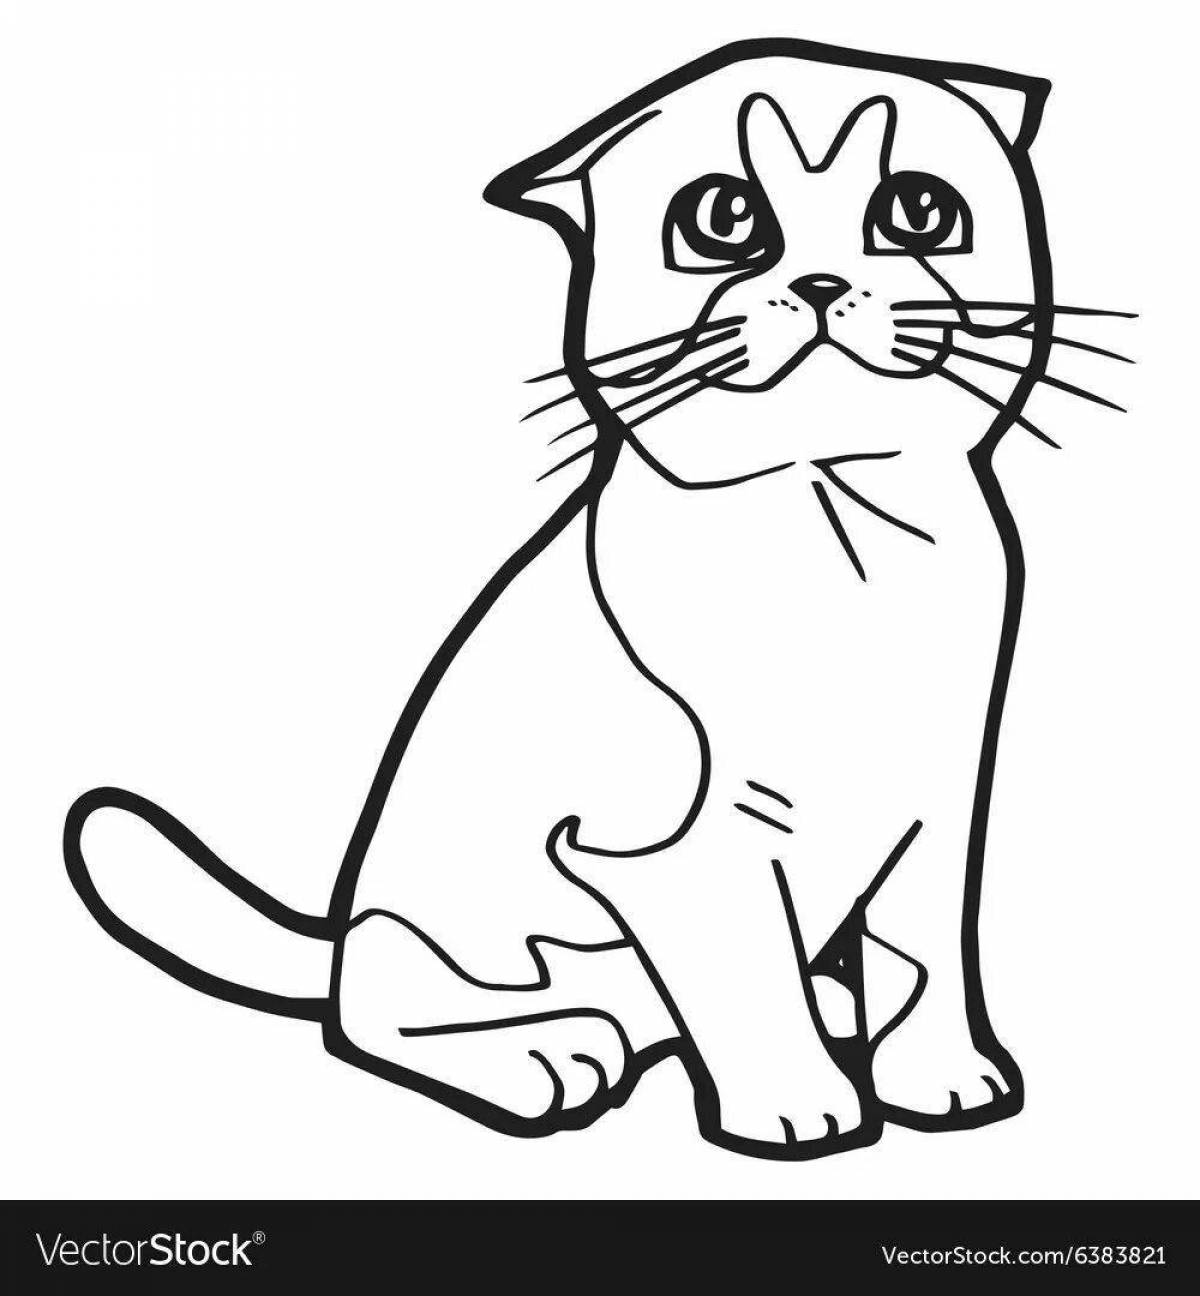 Scottish cat coloring page